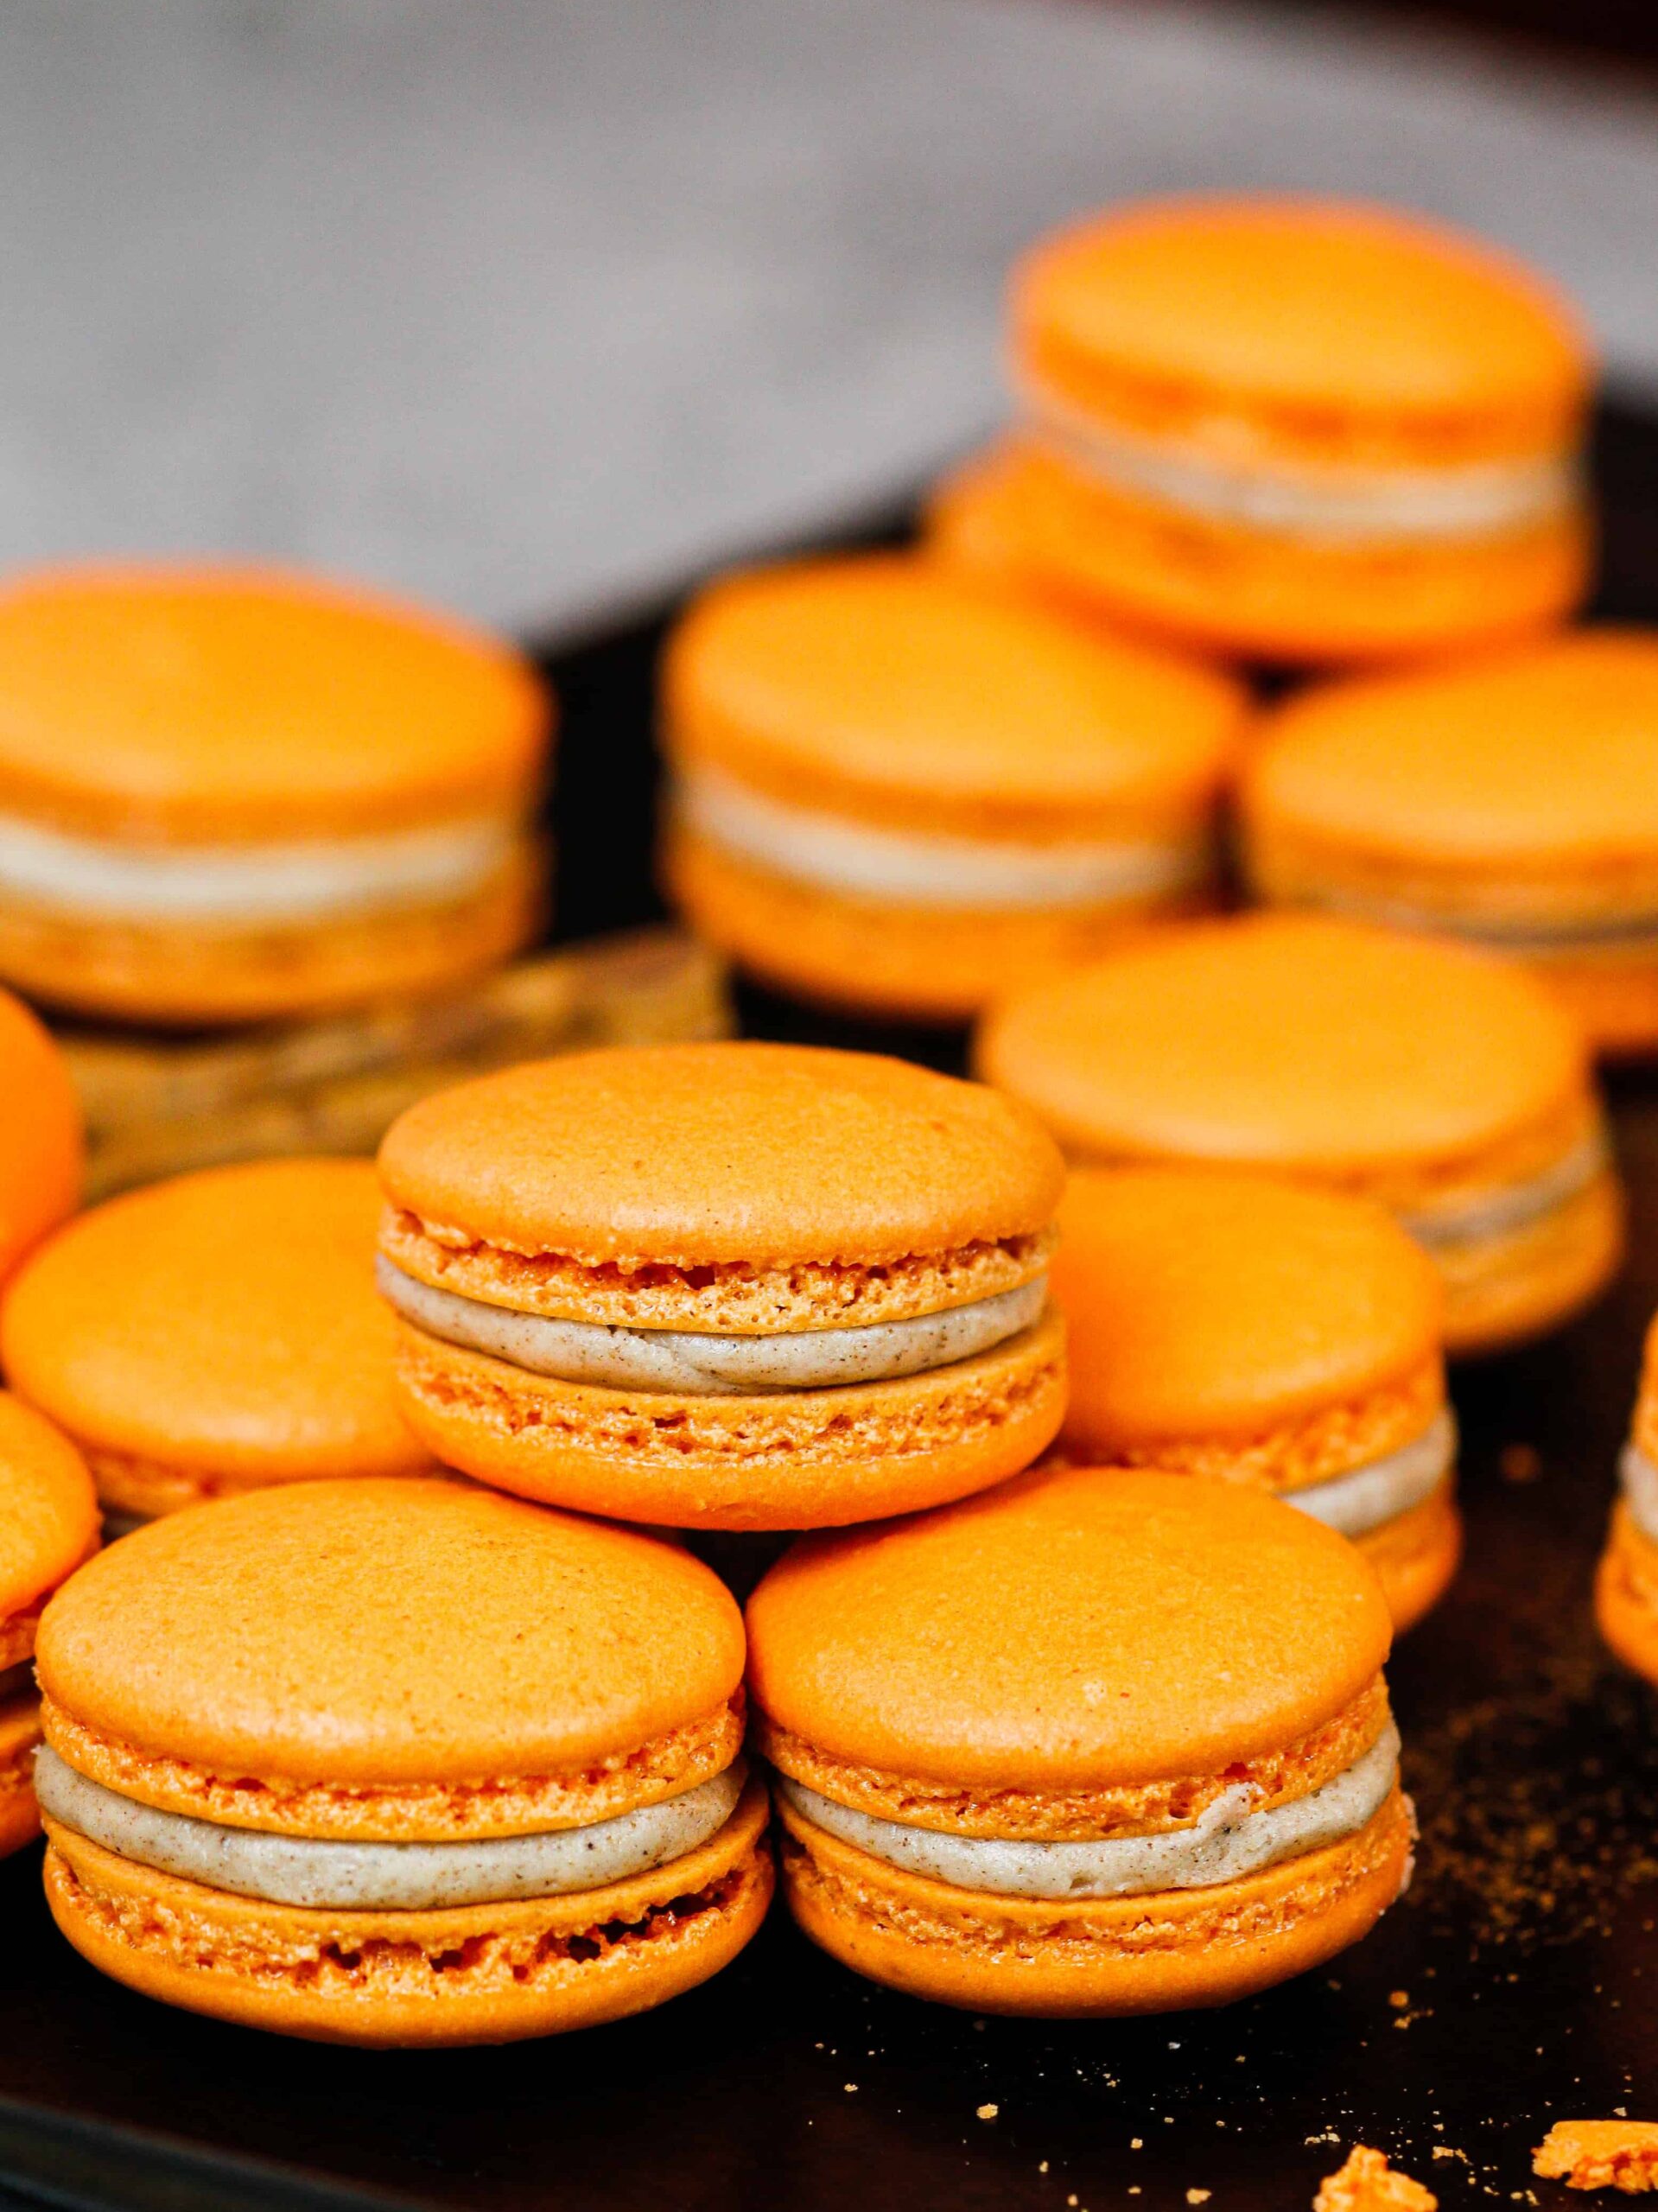 image of pumpkin macarons on a baking tray